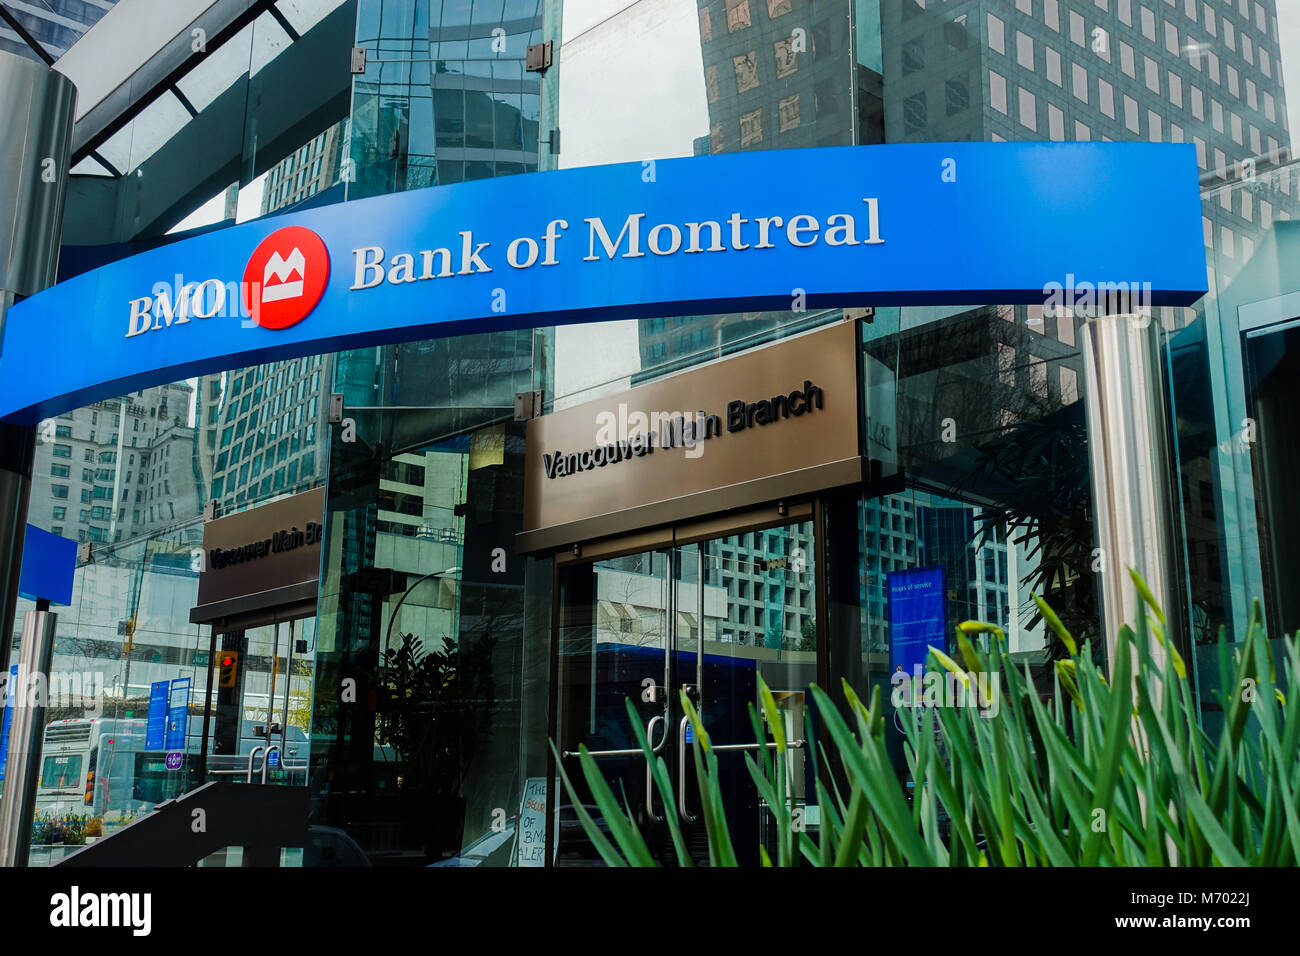 March 7 2018 Bmo Bank Of Montreal Vancouver Main Branch At